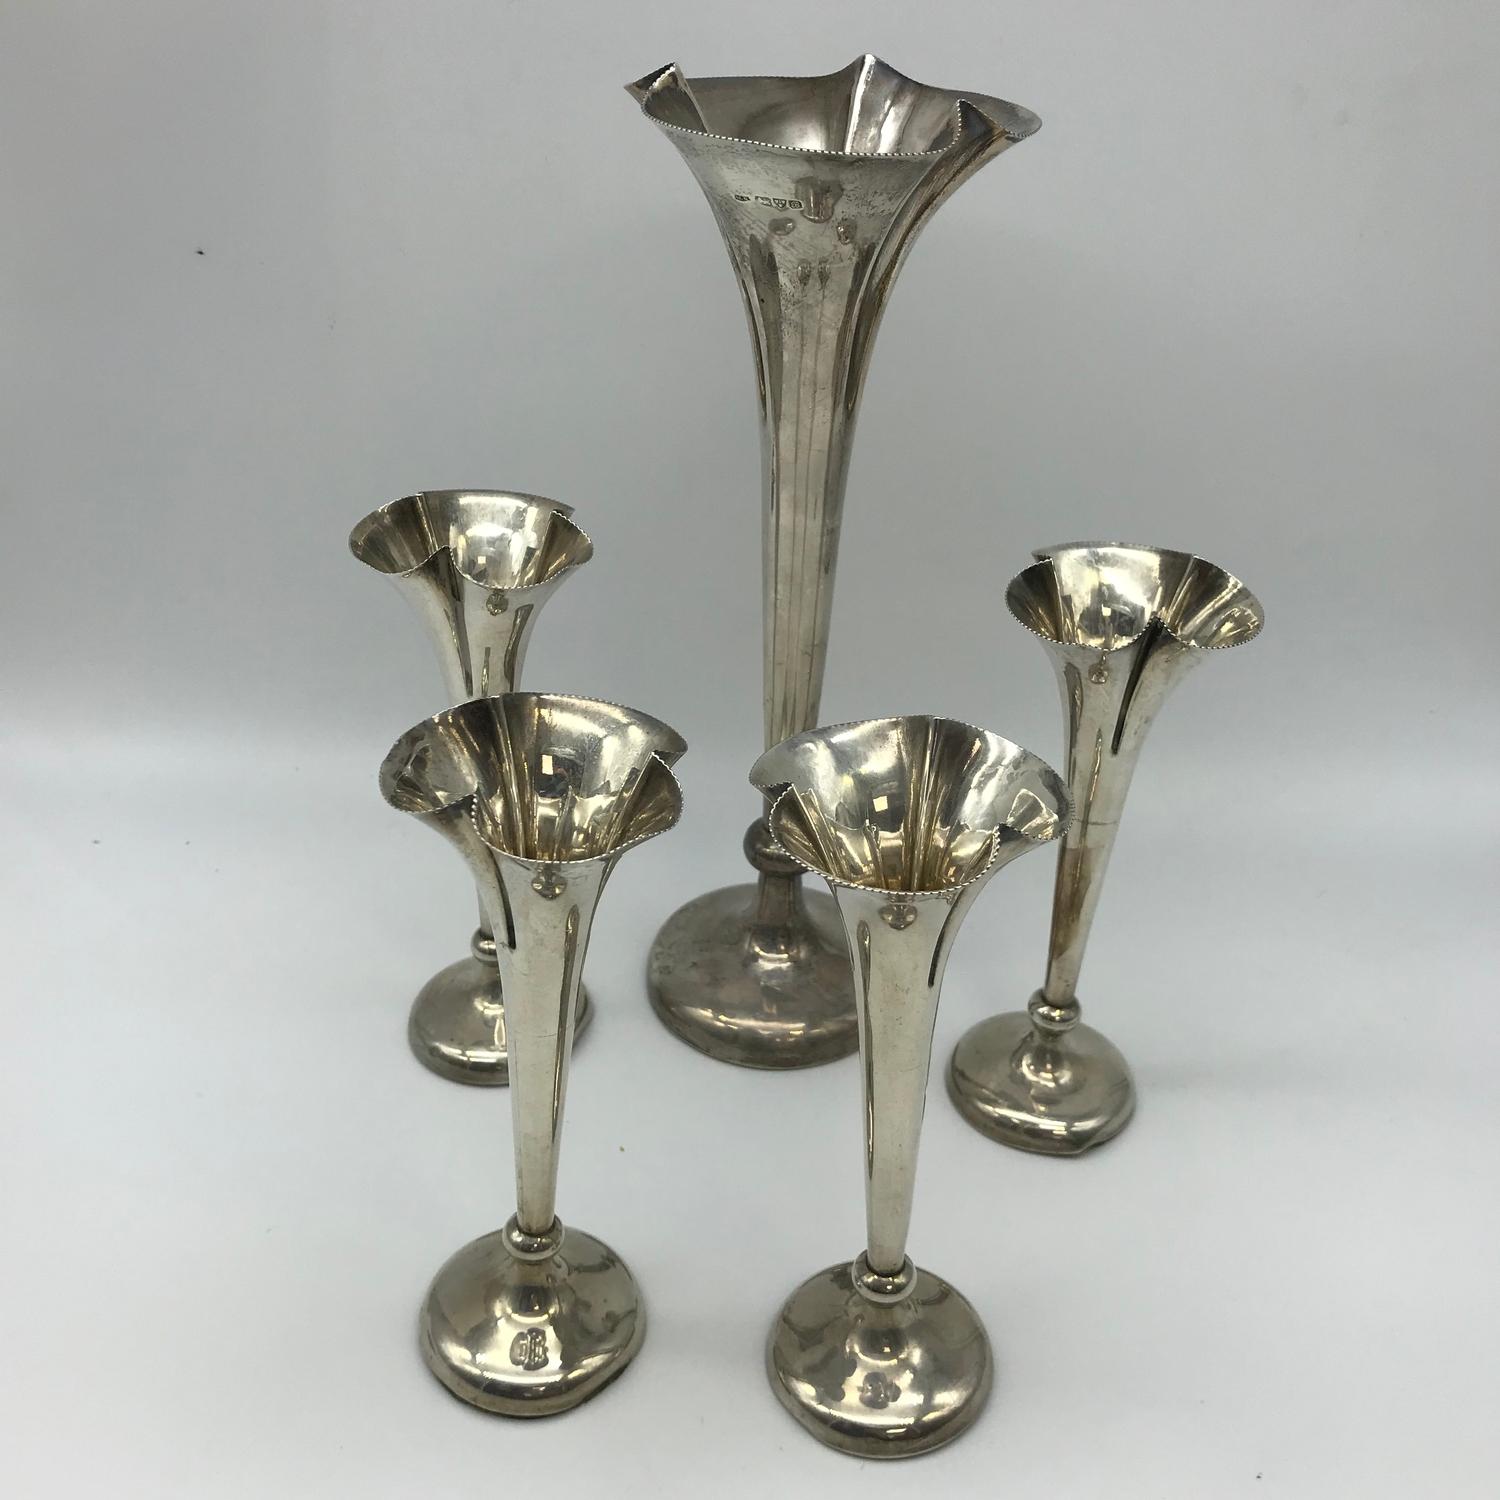 A Large Chester silver bud vase (Weighted) together with 4 Birmingham silver smaller matching bud